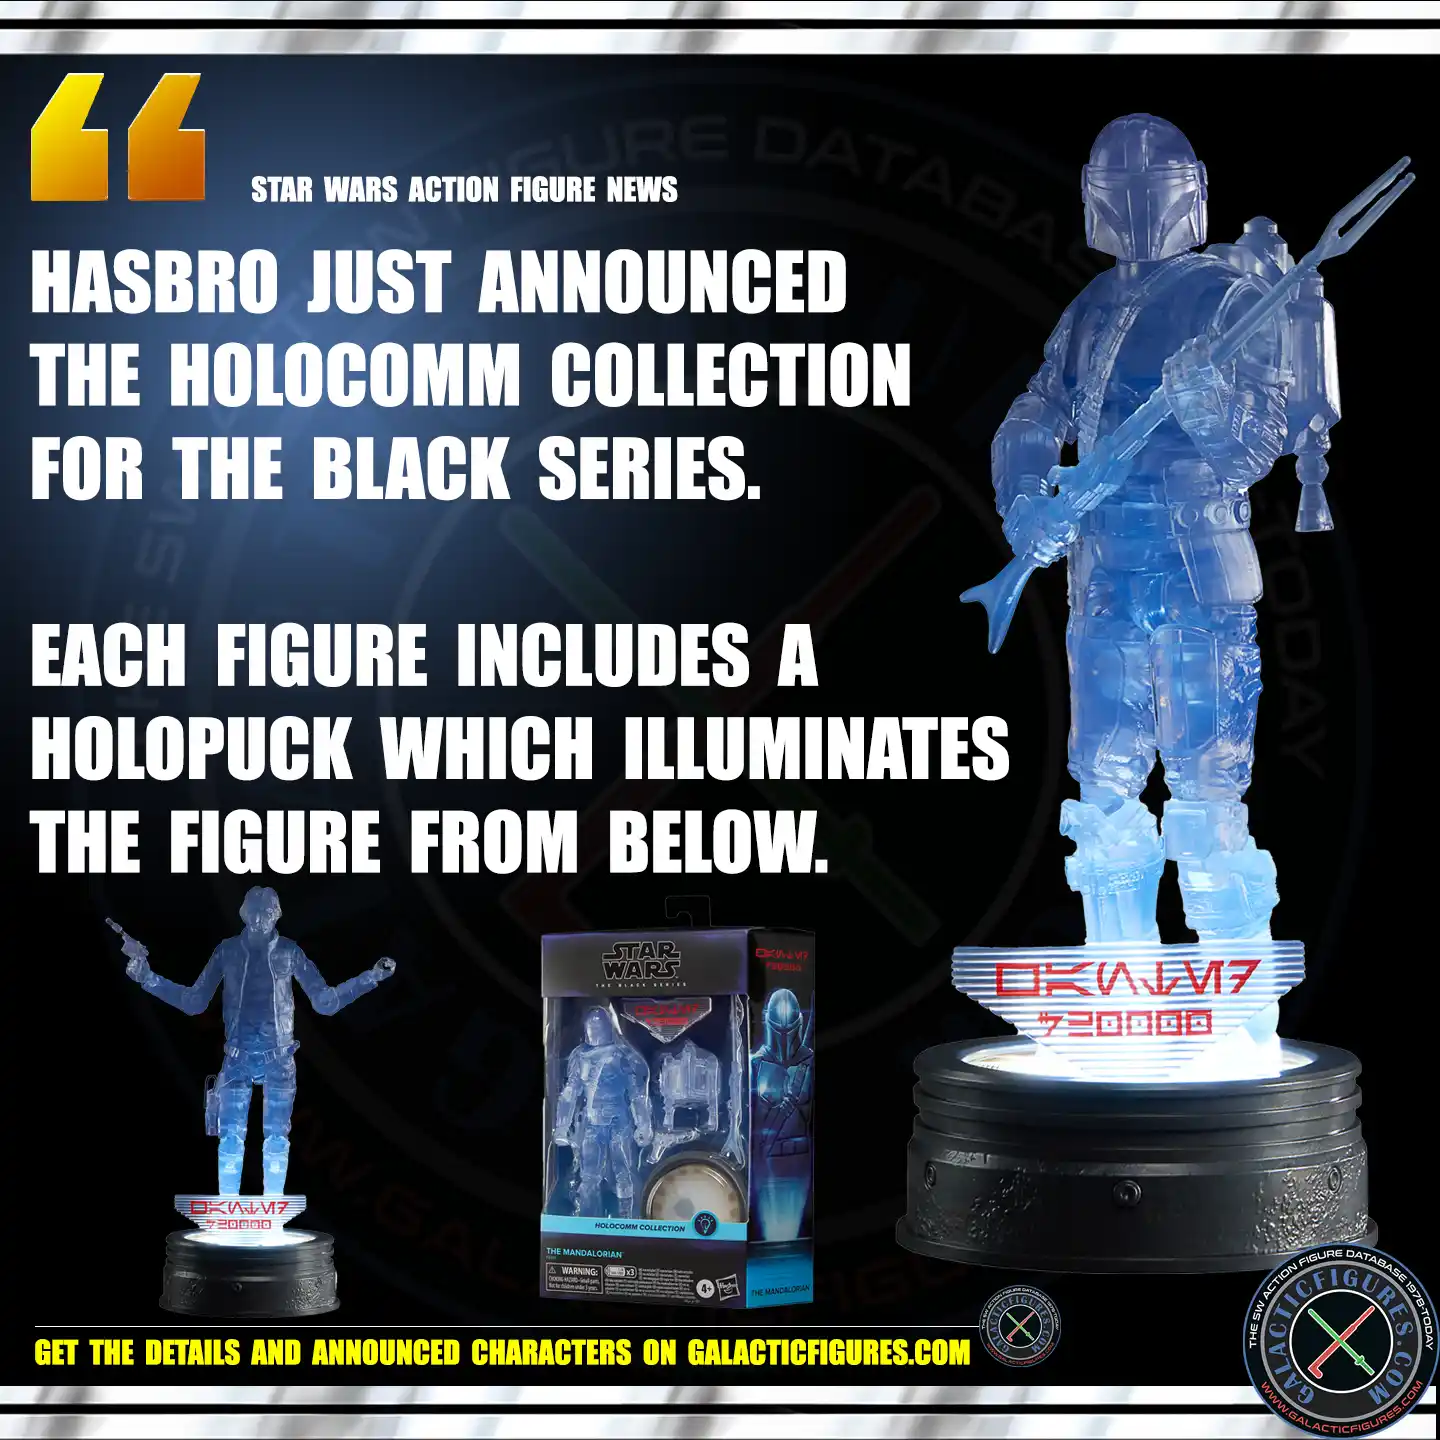 Black Series Holocomm Collection Announced